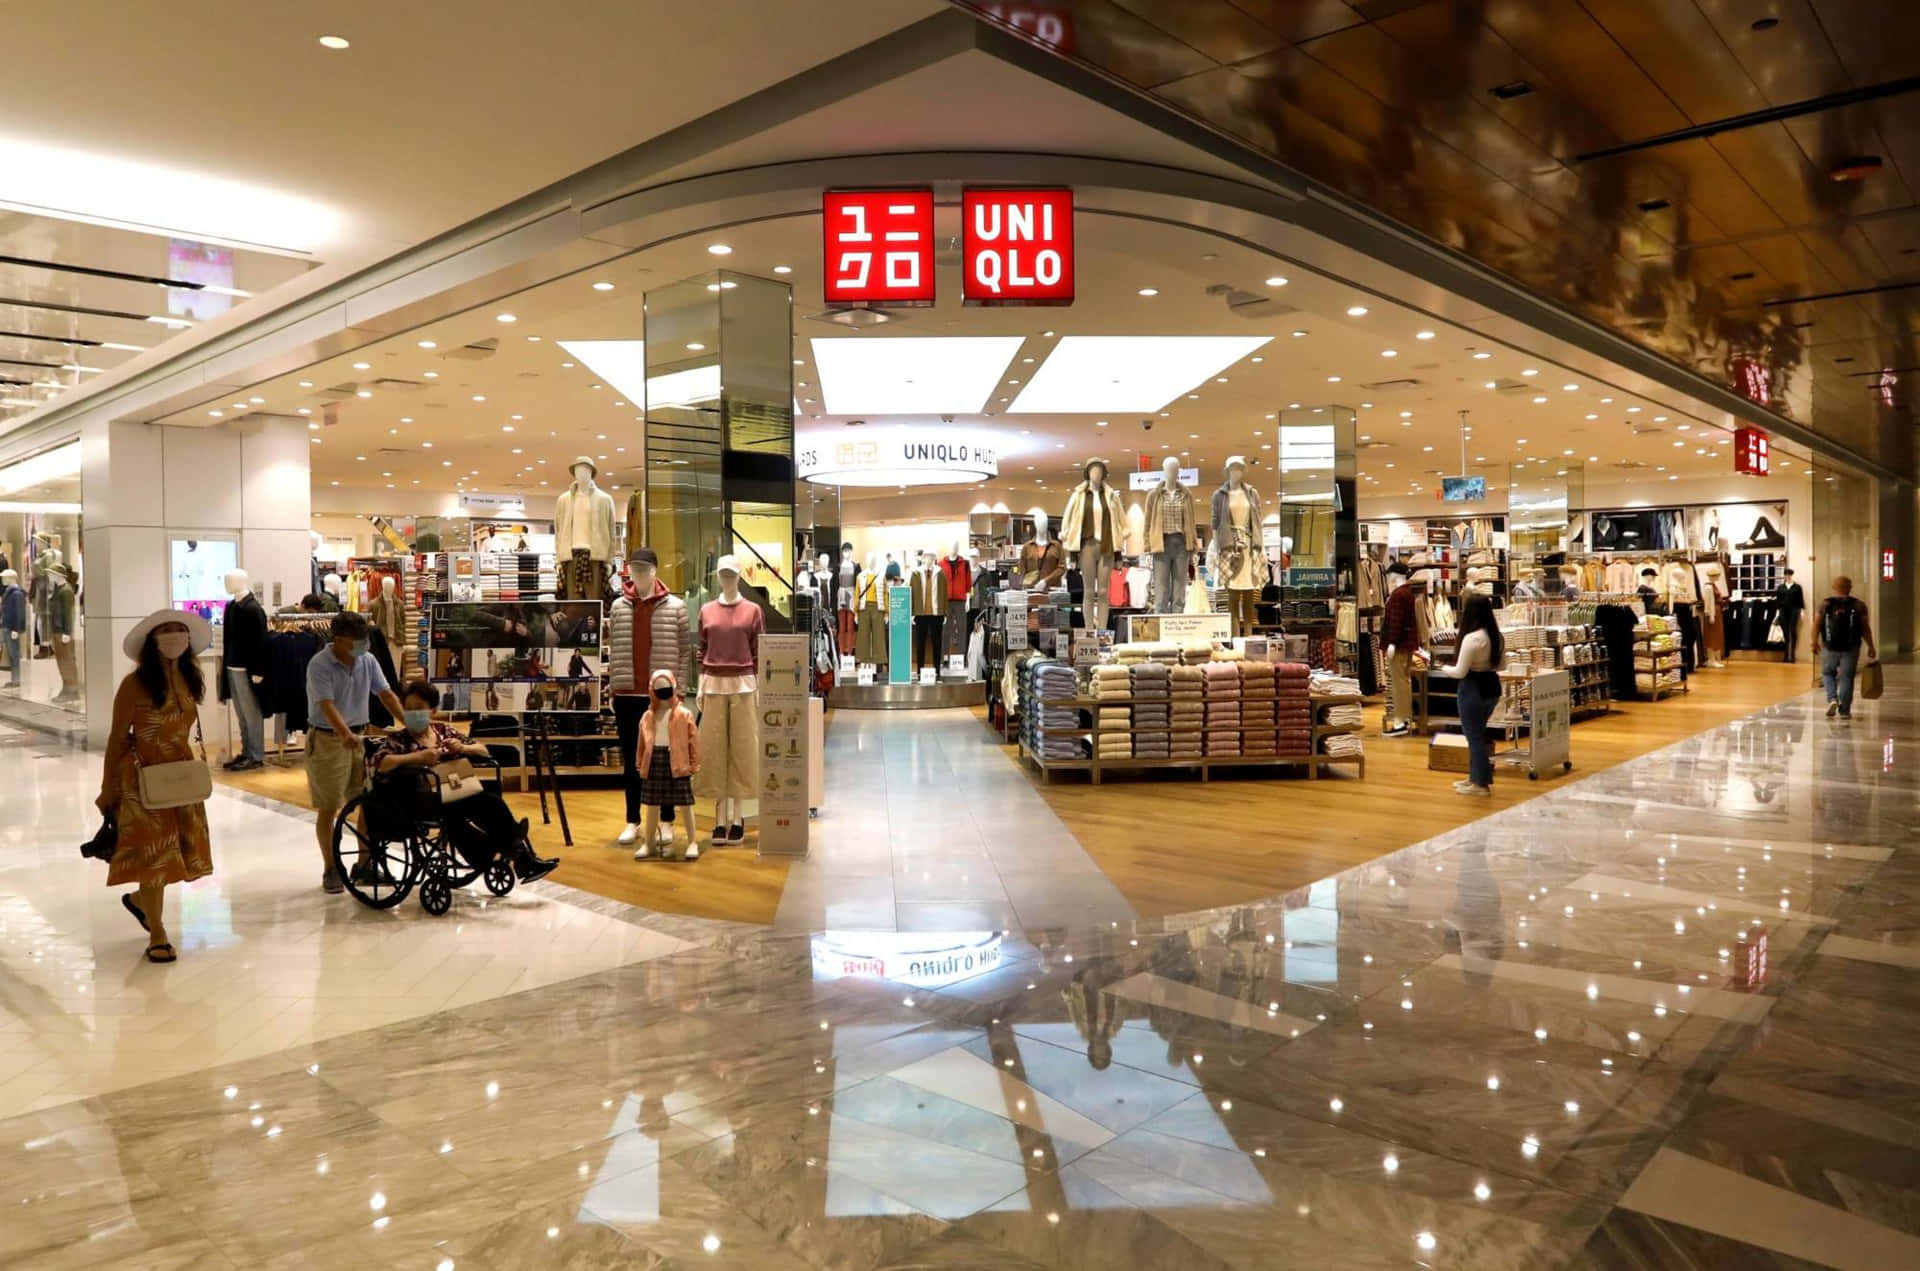 Uniqlo offers stylish, comfortable and affordable fashion pieces.